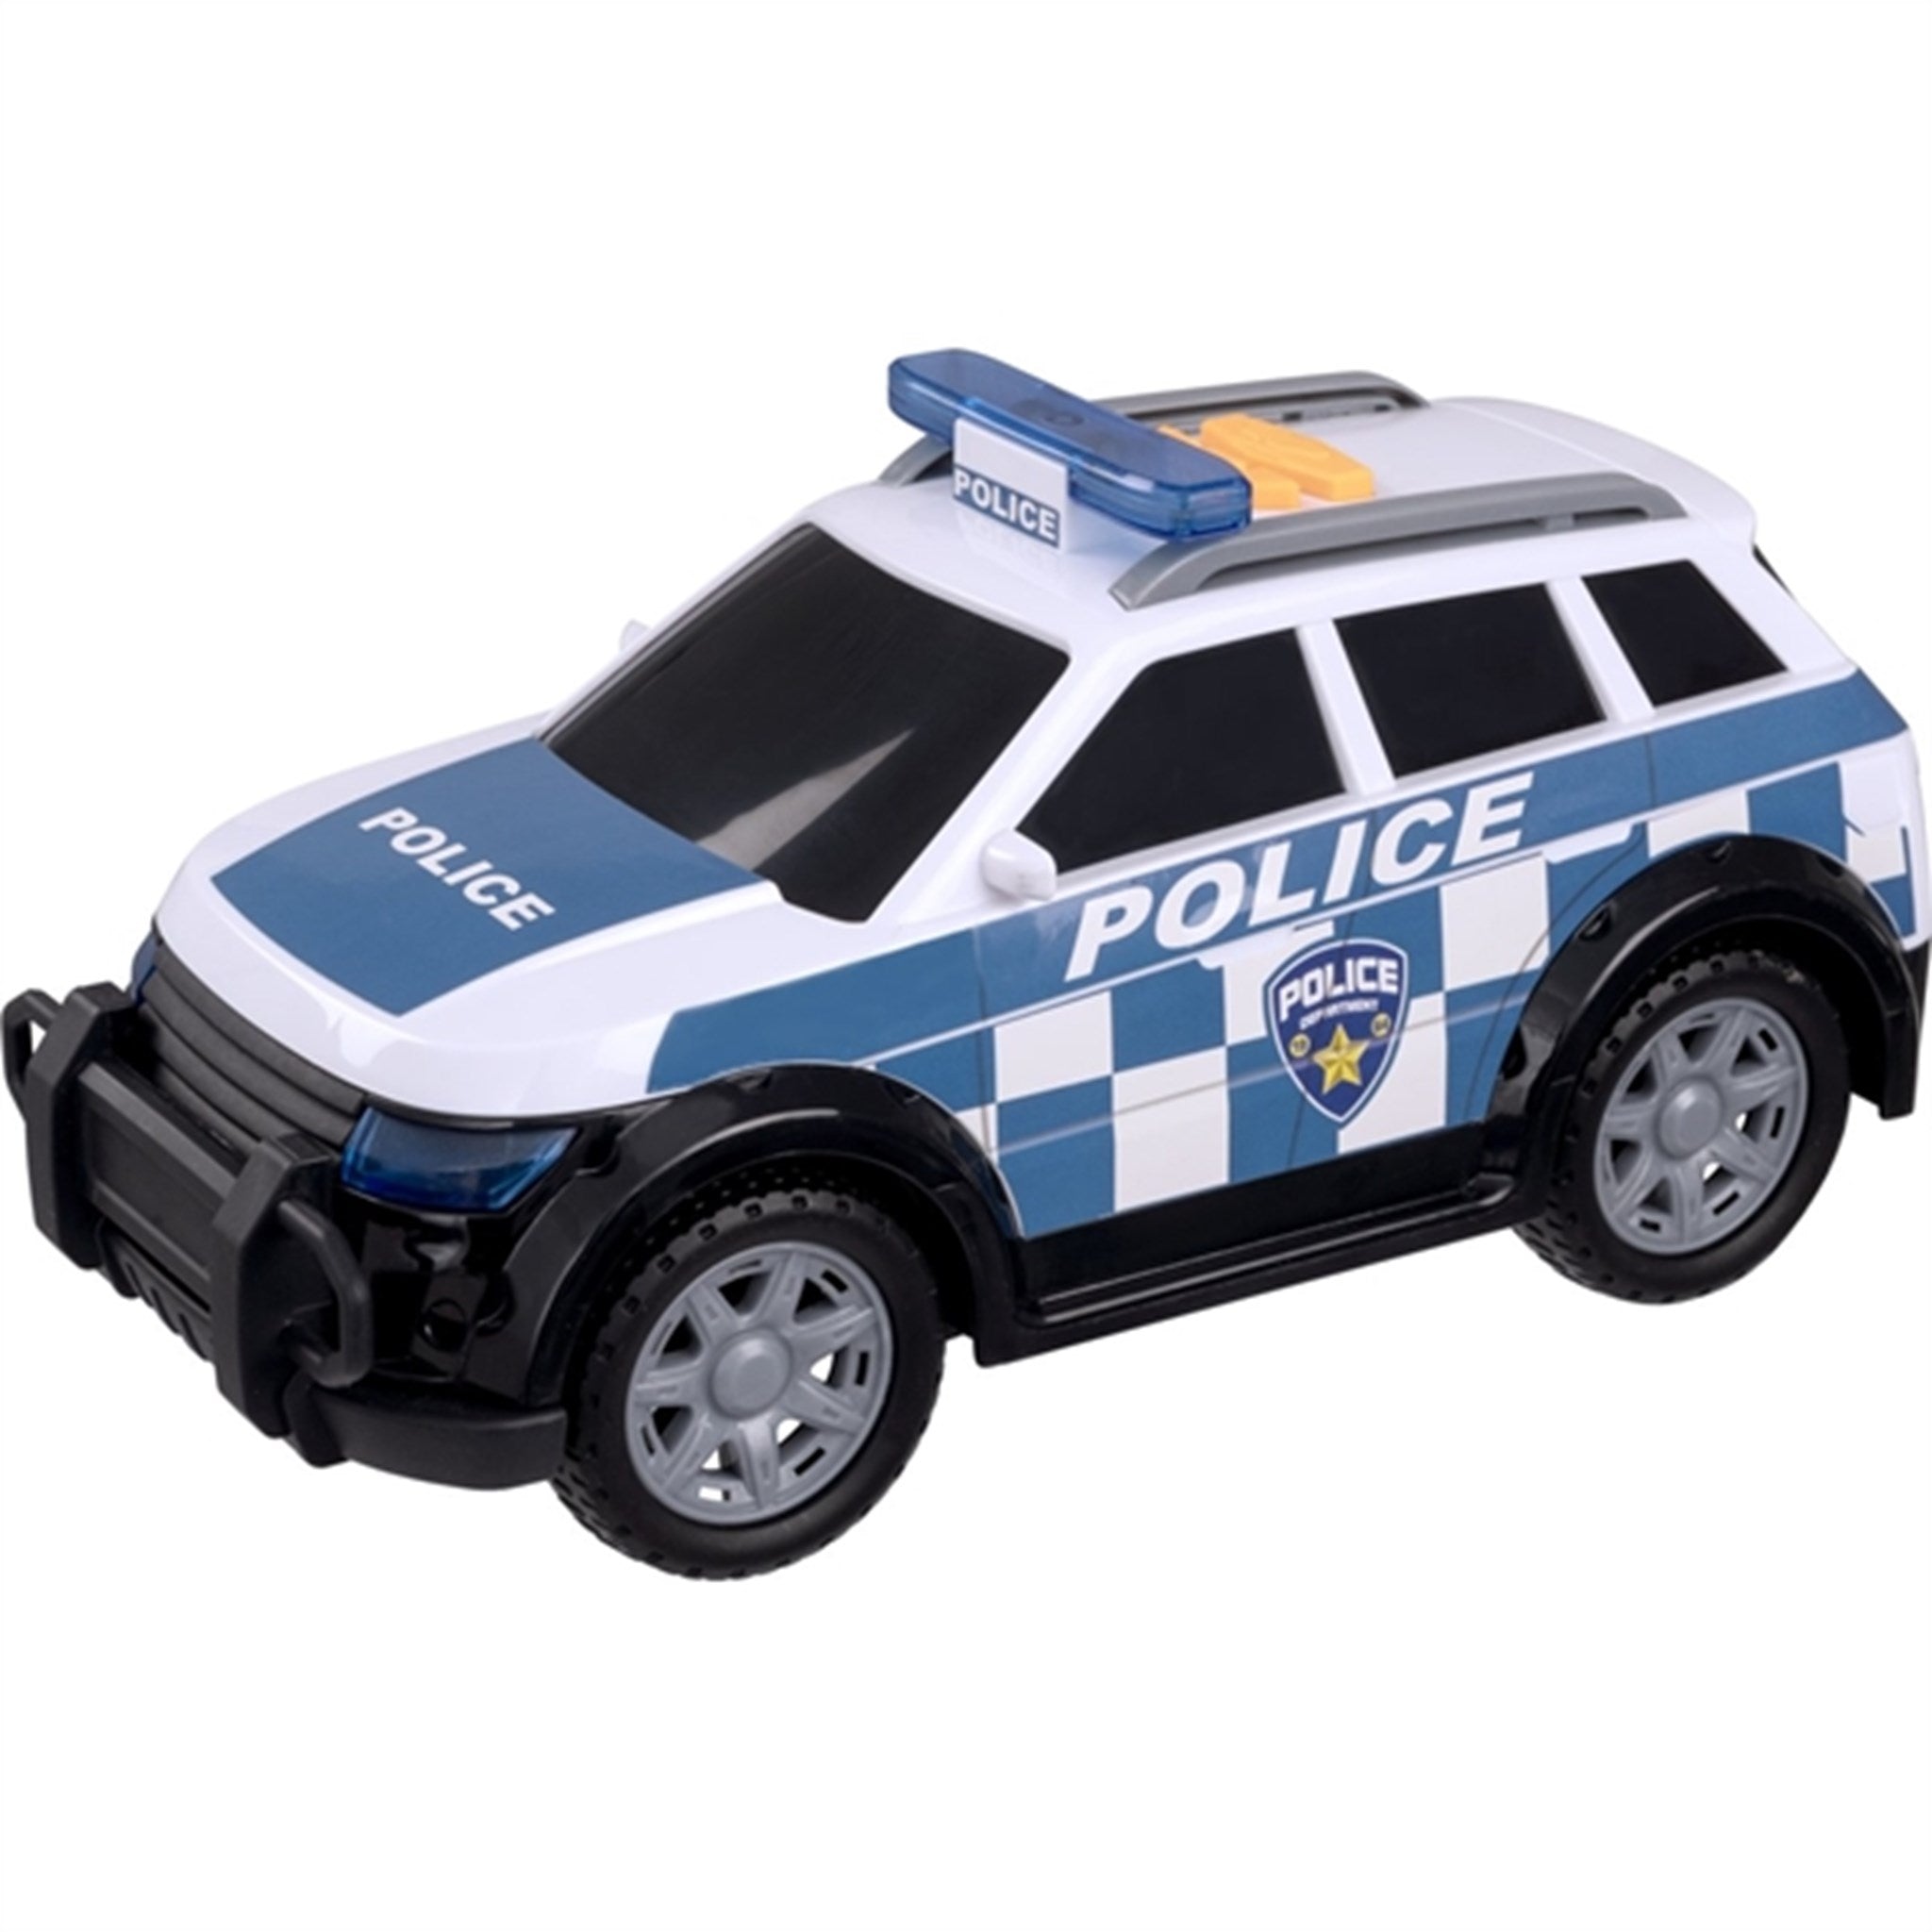 Teamsterz Mighty Moverz Police 4 x 4 White